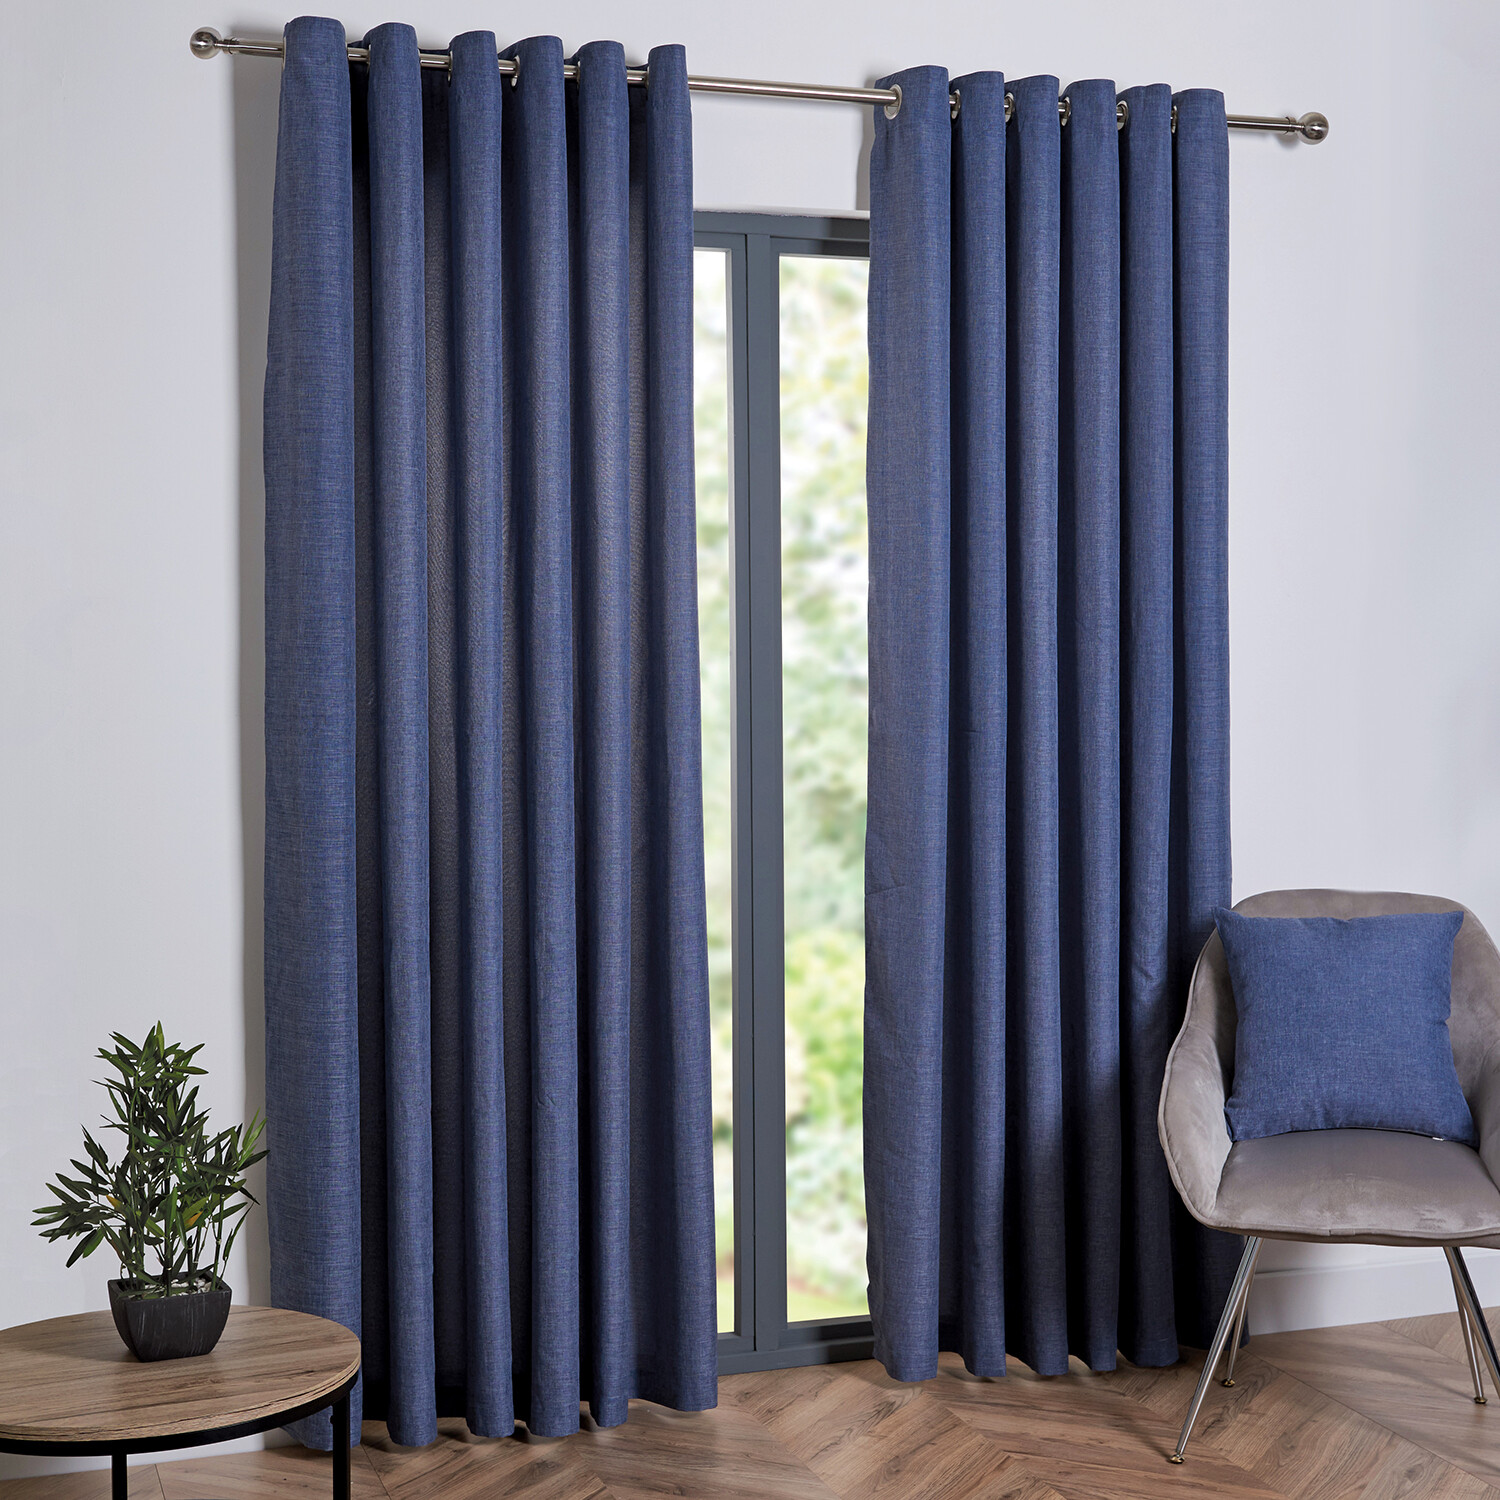 My Home Navy Taylor Eyelet Curtains 168 x 183cm Image 2